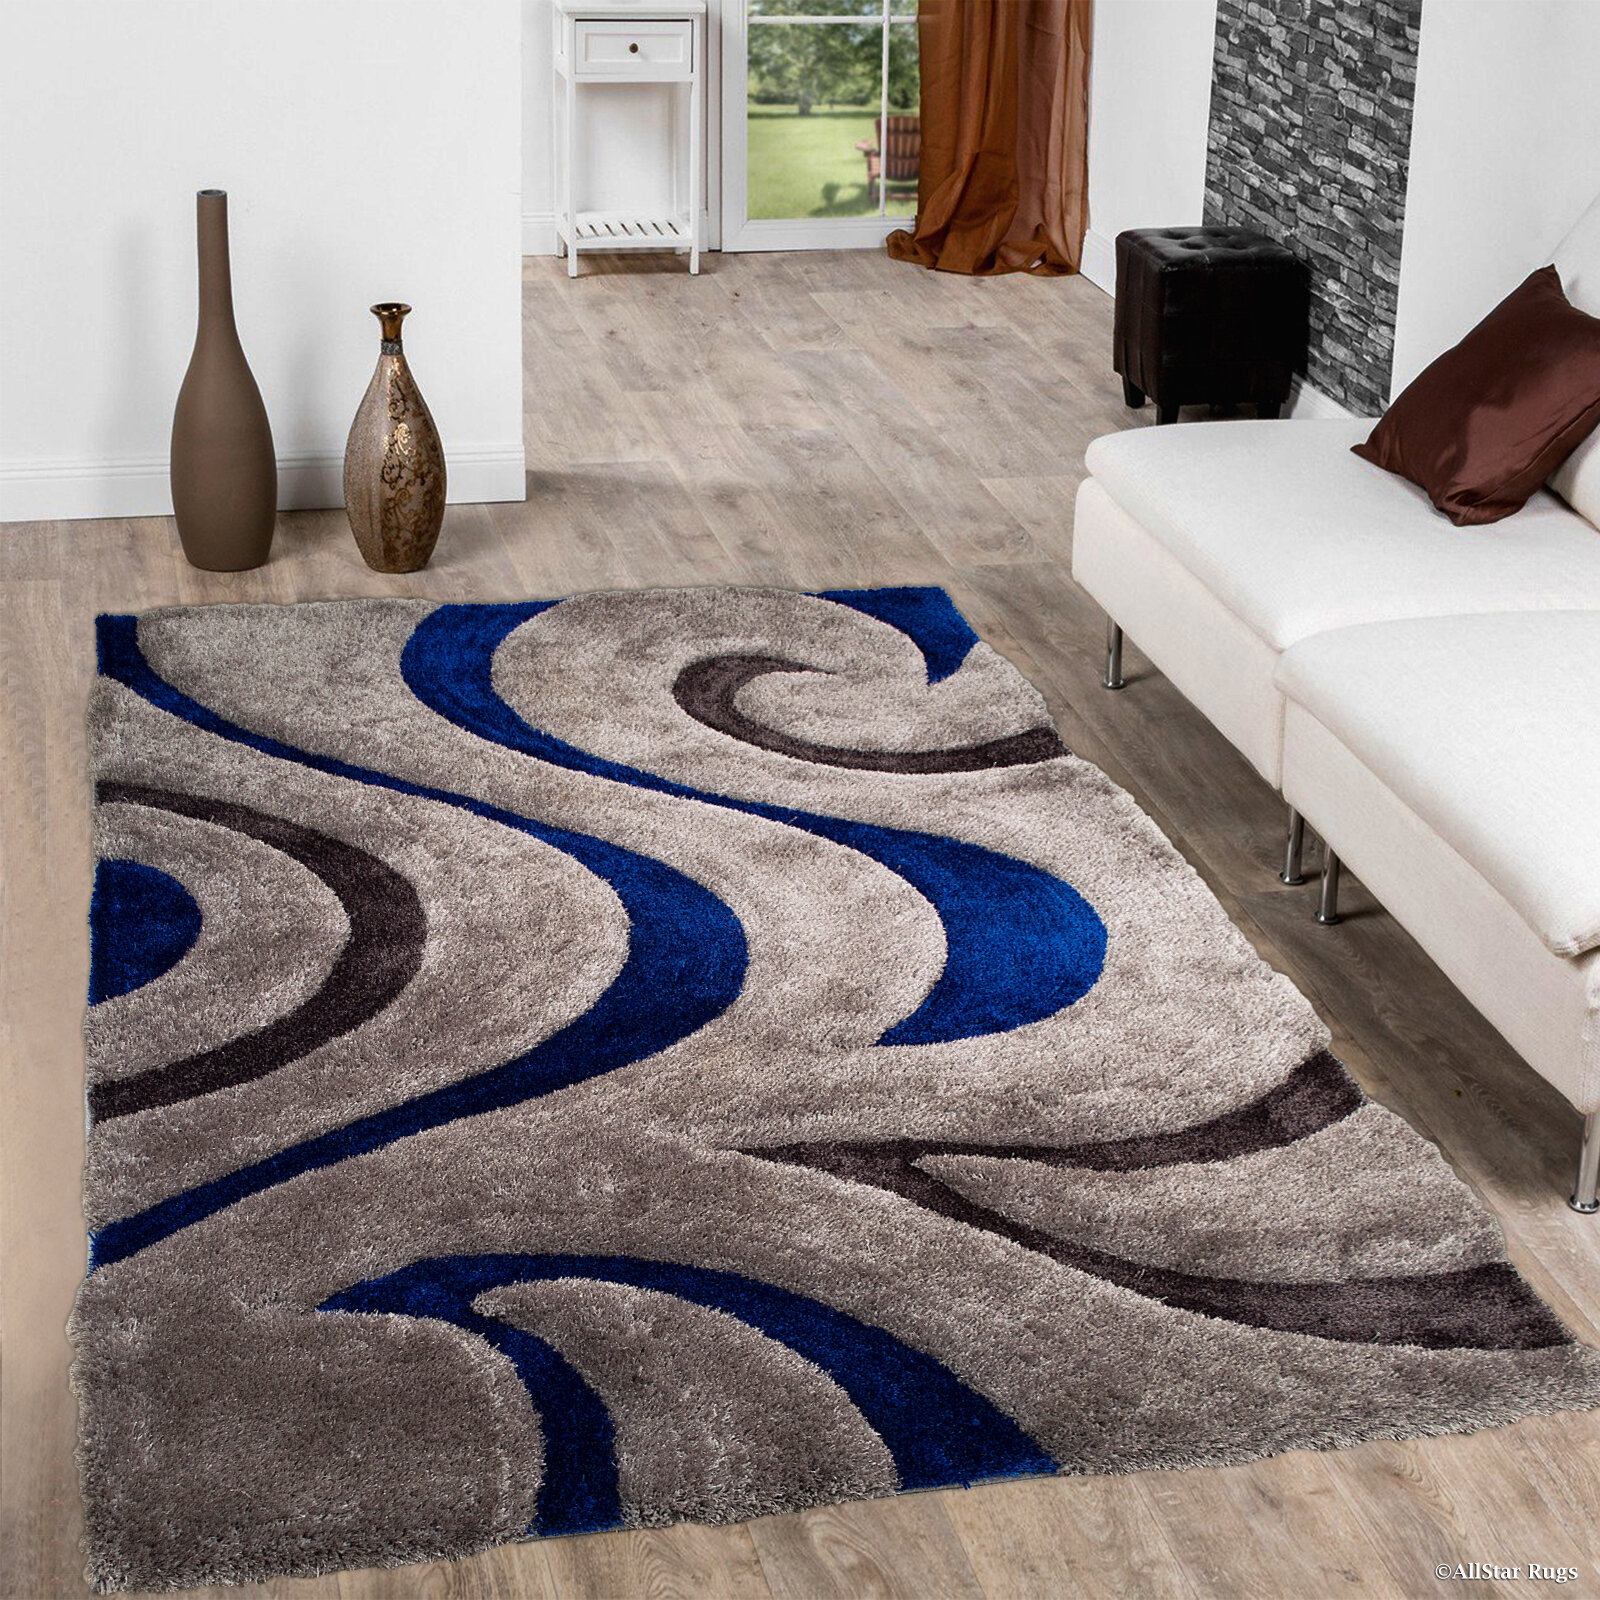 Amazing Rugs A1013-23 2 x 3 ft. Fuzzy Shaggy Blue Hand Tufted Area Rug